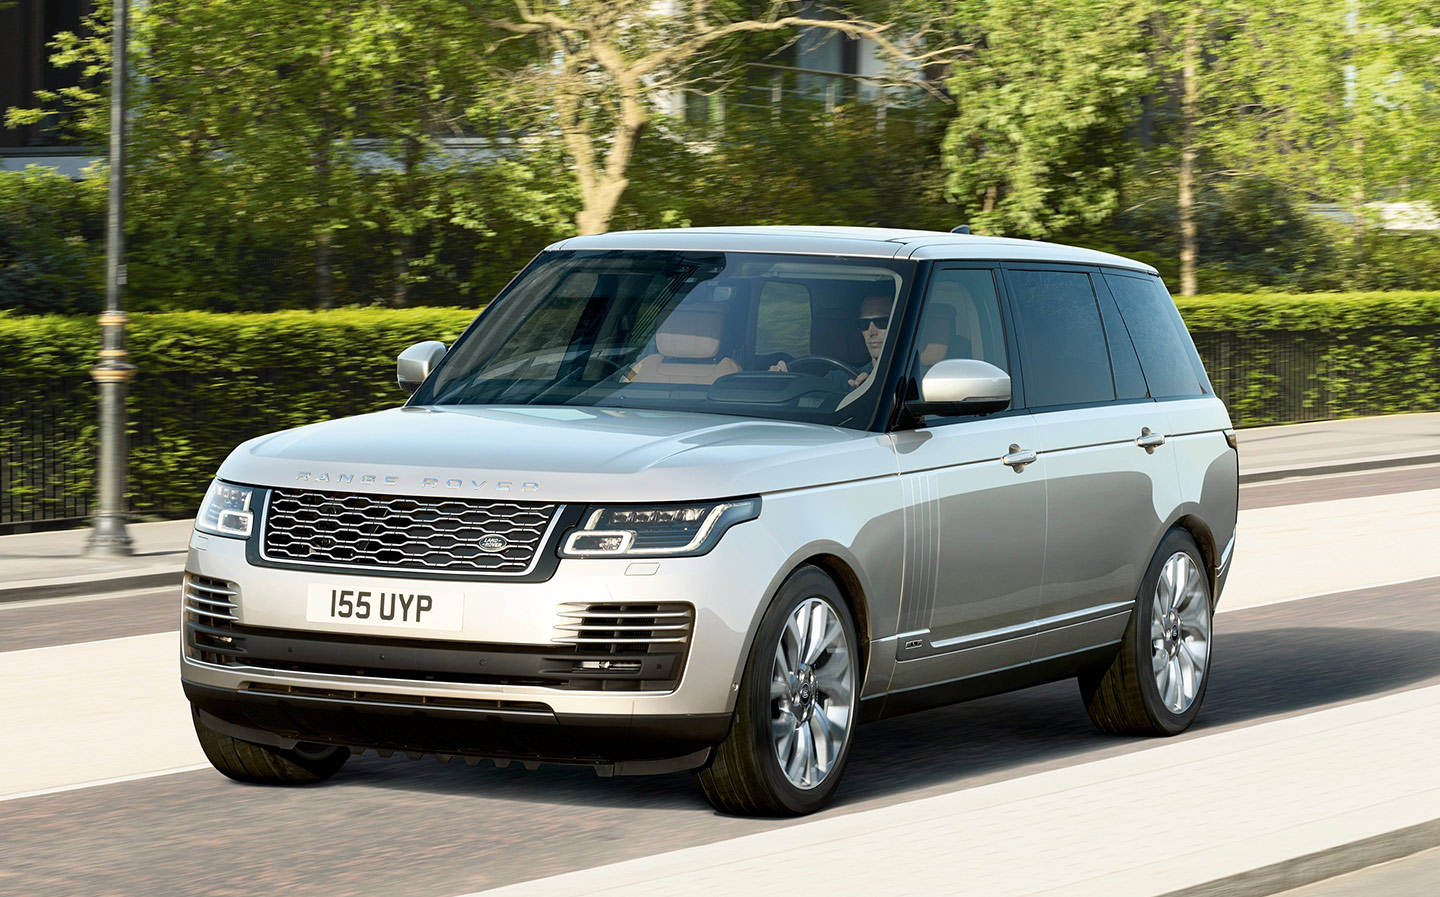 JLR offers free security upgrade to tackle high proportion of Land Rover thefts